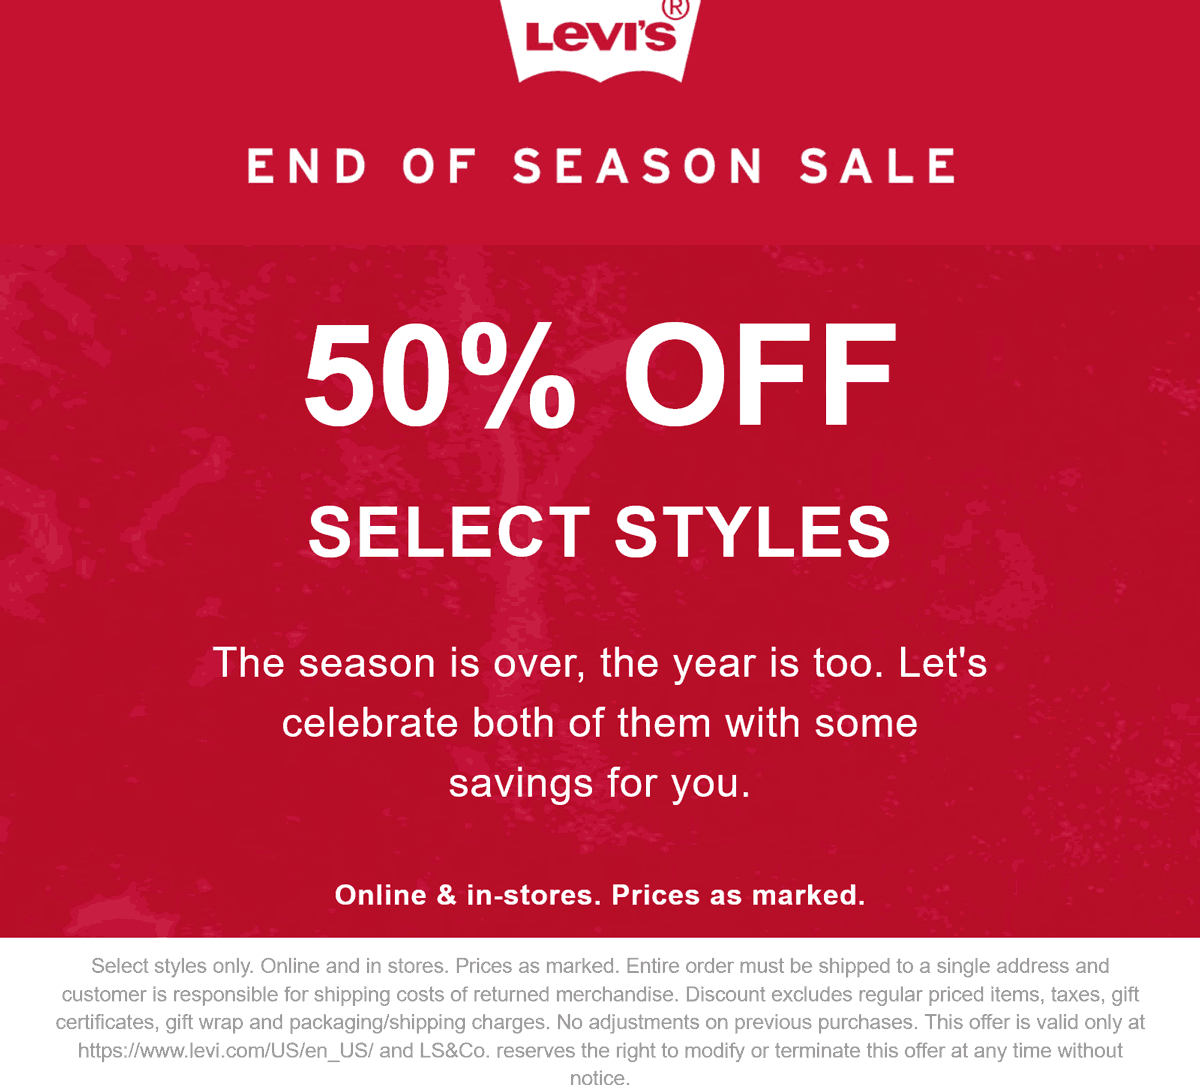 Levis stores Coupon  Various styles 50% off at Levis #levis 